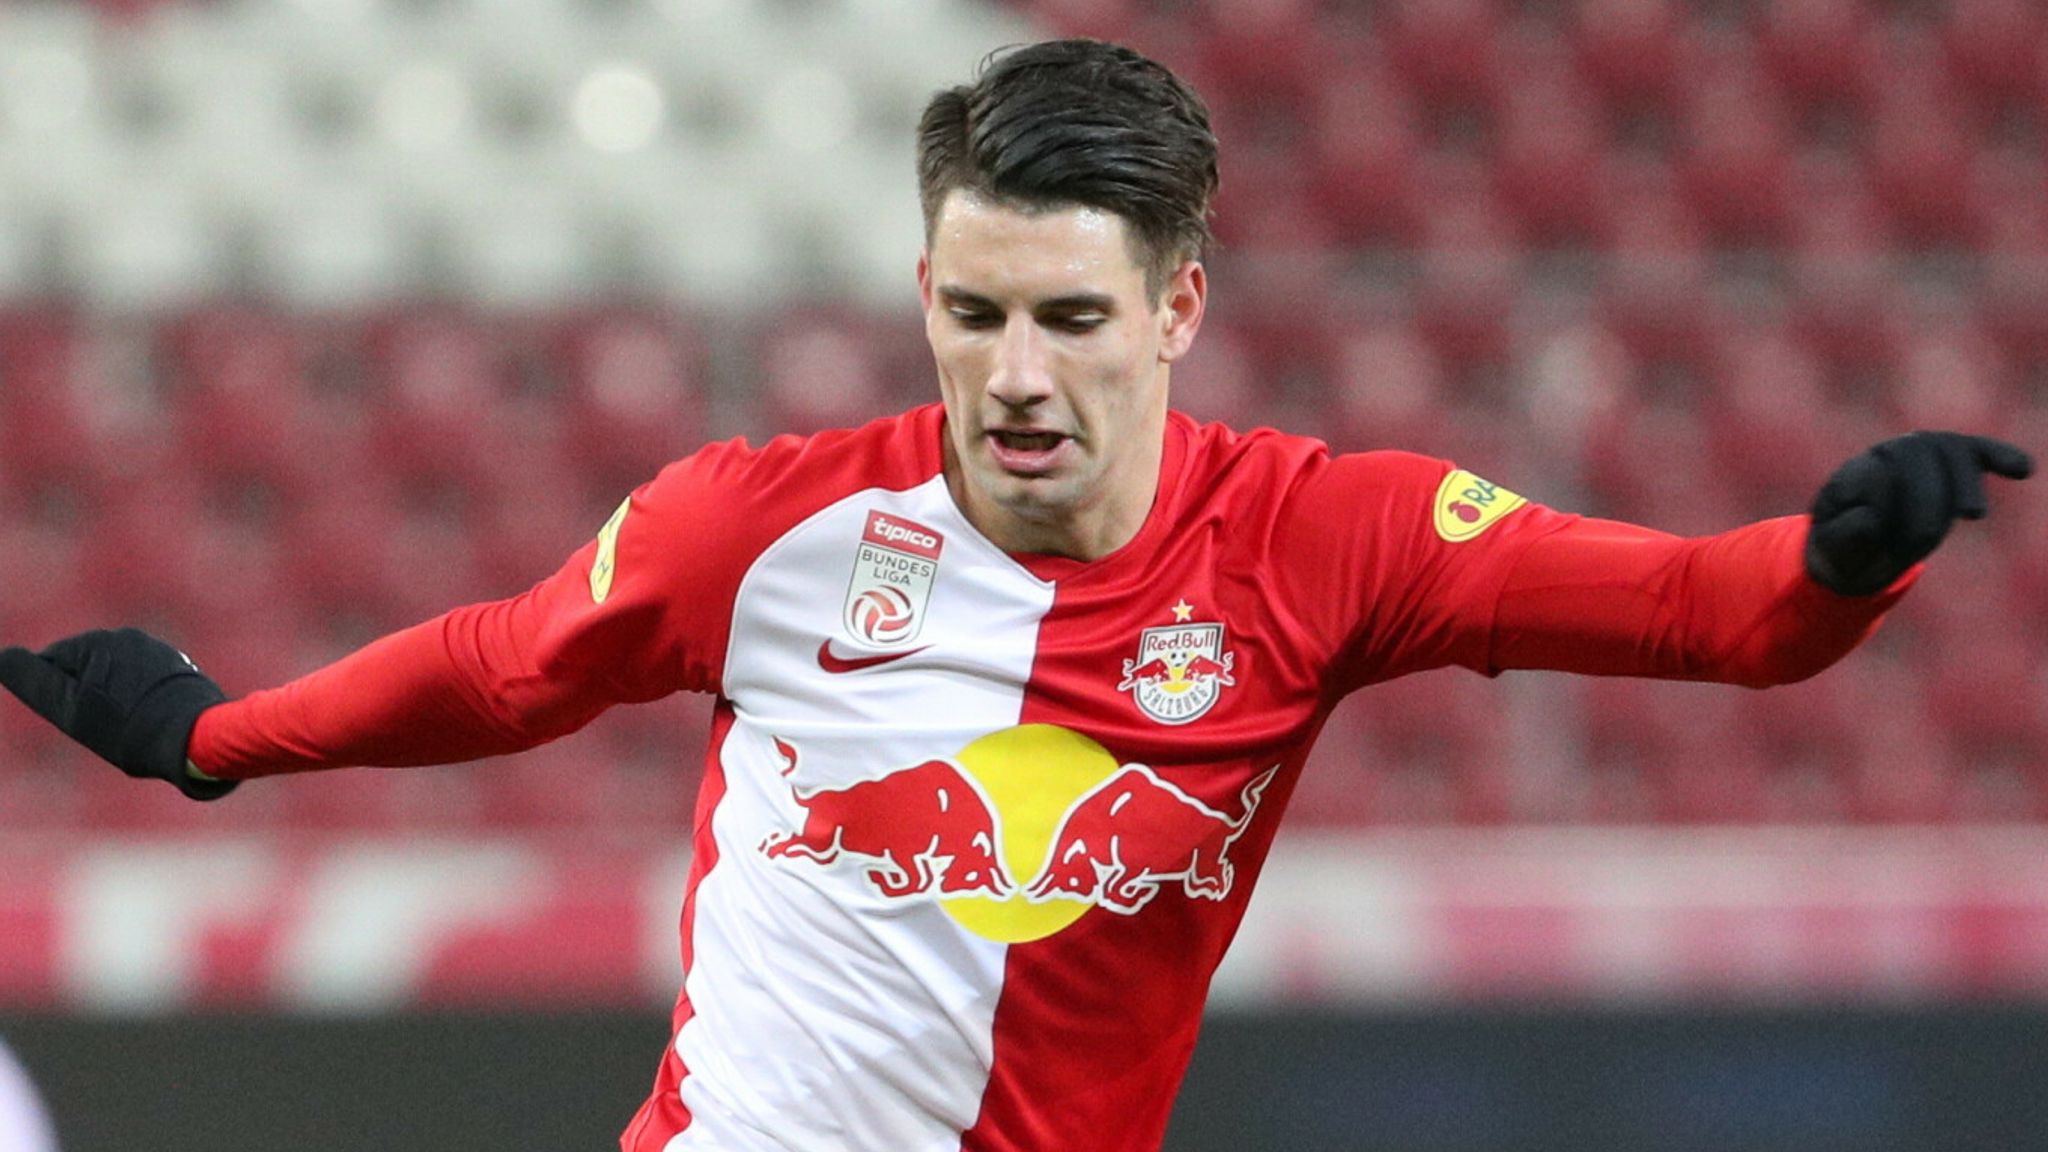 Dominik Szoboszlai: Arsenal continue midfielder search with target set to join RB Leipzig, says sporting director Edu